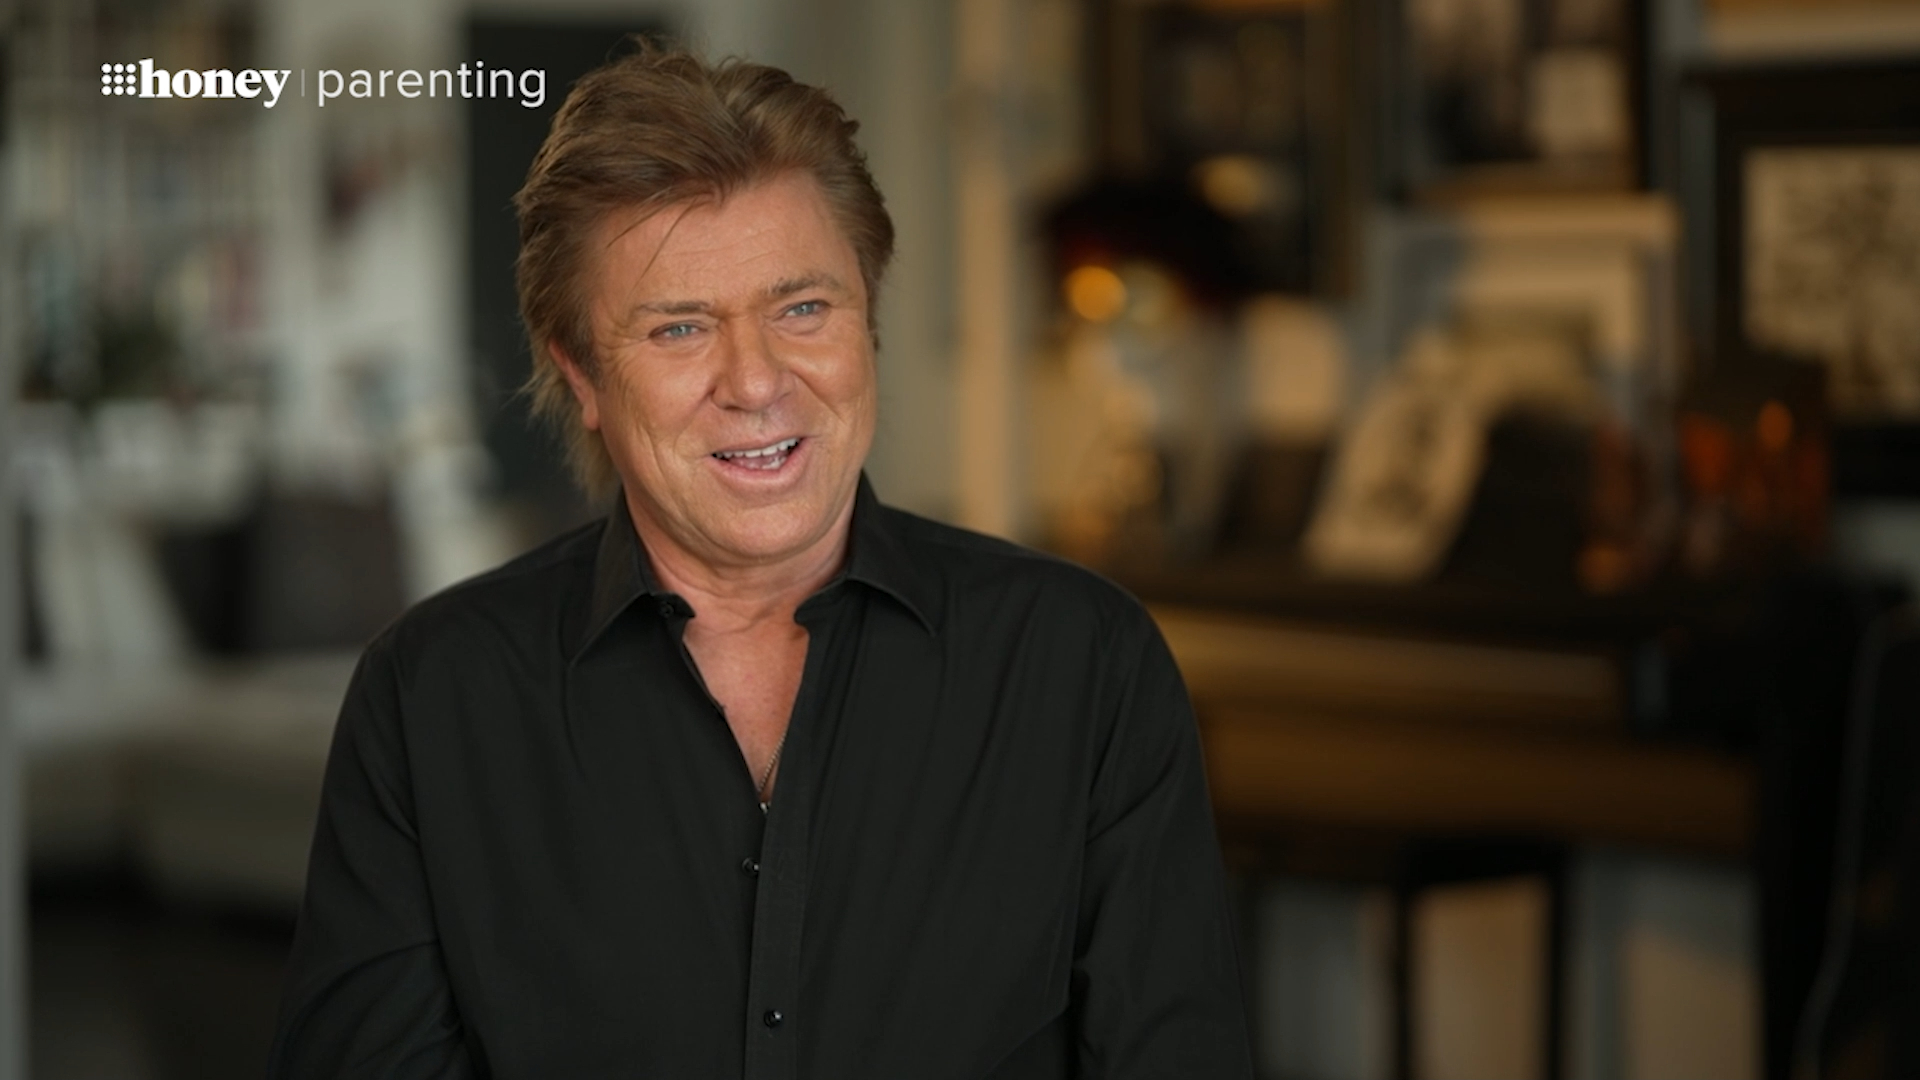 Richard Wilkins opens up about the 'great joy' of fatherhood